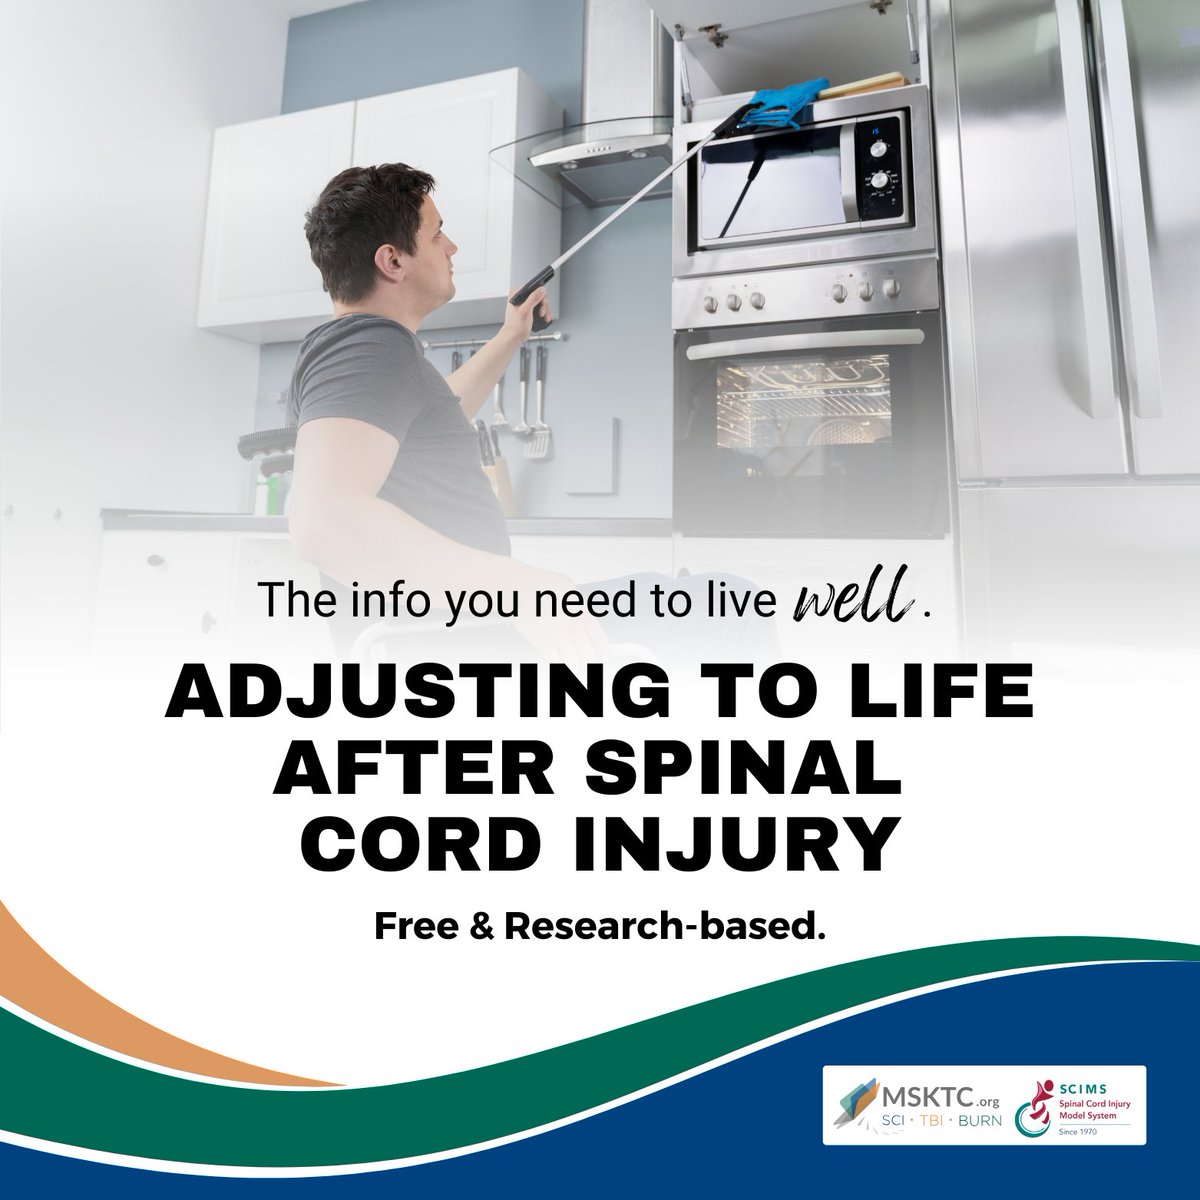 Going home is a major step in adjusting to life after #spinalcordinjury - it can be exciting and scary. Learn more about what to expect when you first go home after injury with this #MSKTC factsheet. msktc.org/sci/factsheets…